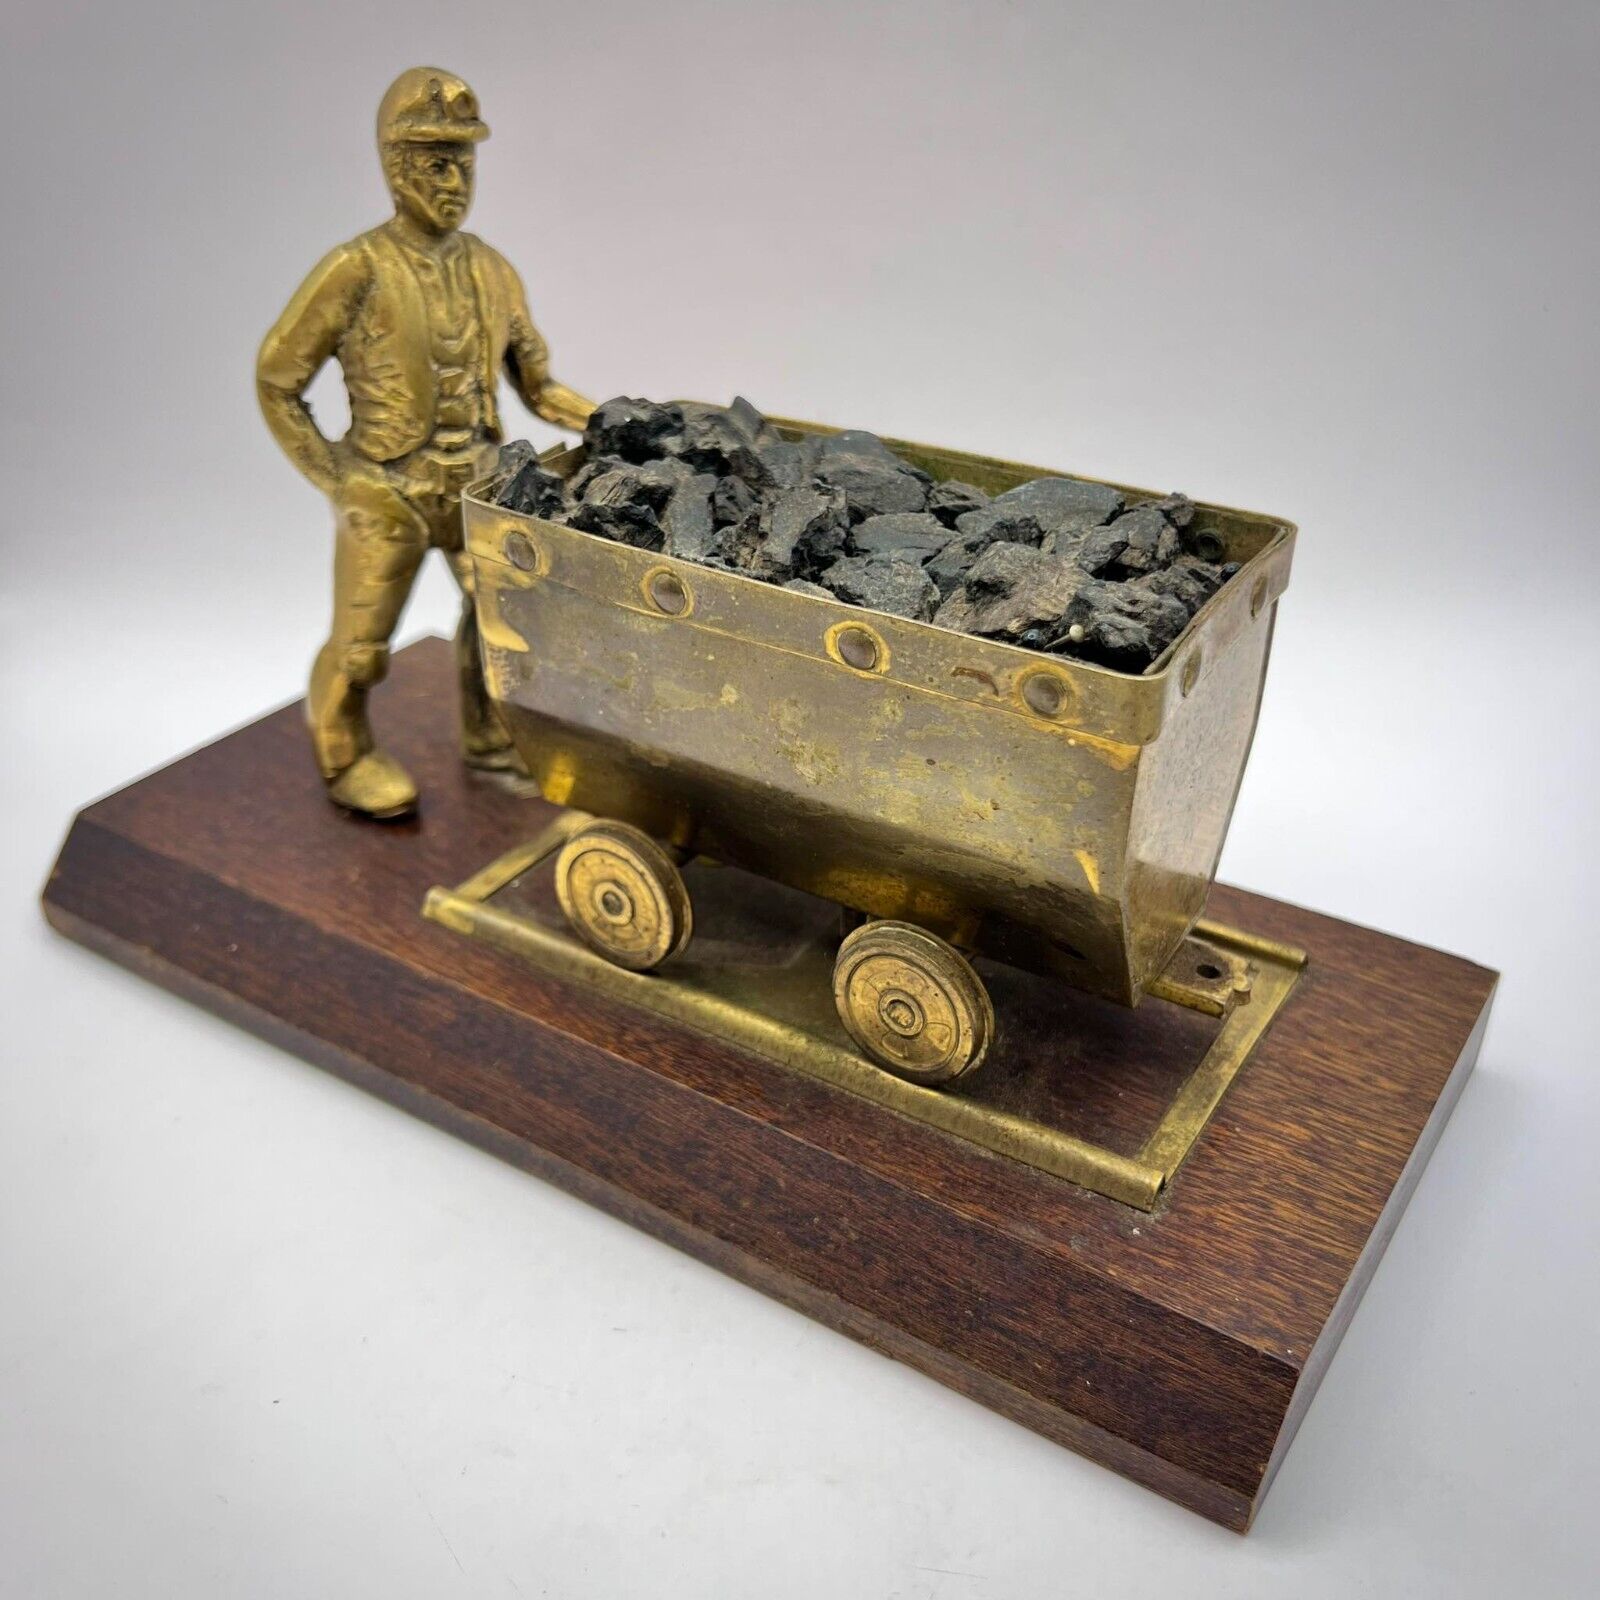 VINTAGE BRONZE FIGURE STATUE Miner Trolley with Real Coal on Wood Base England